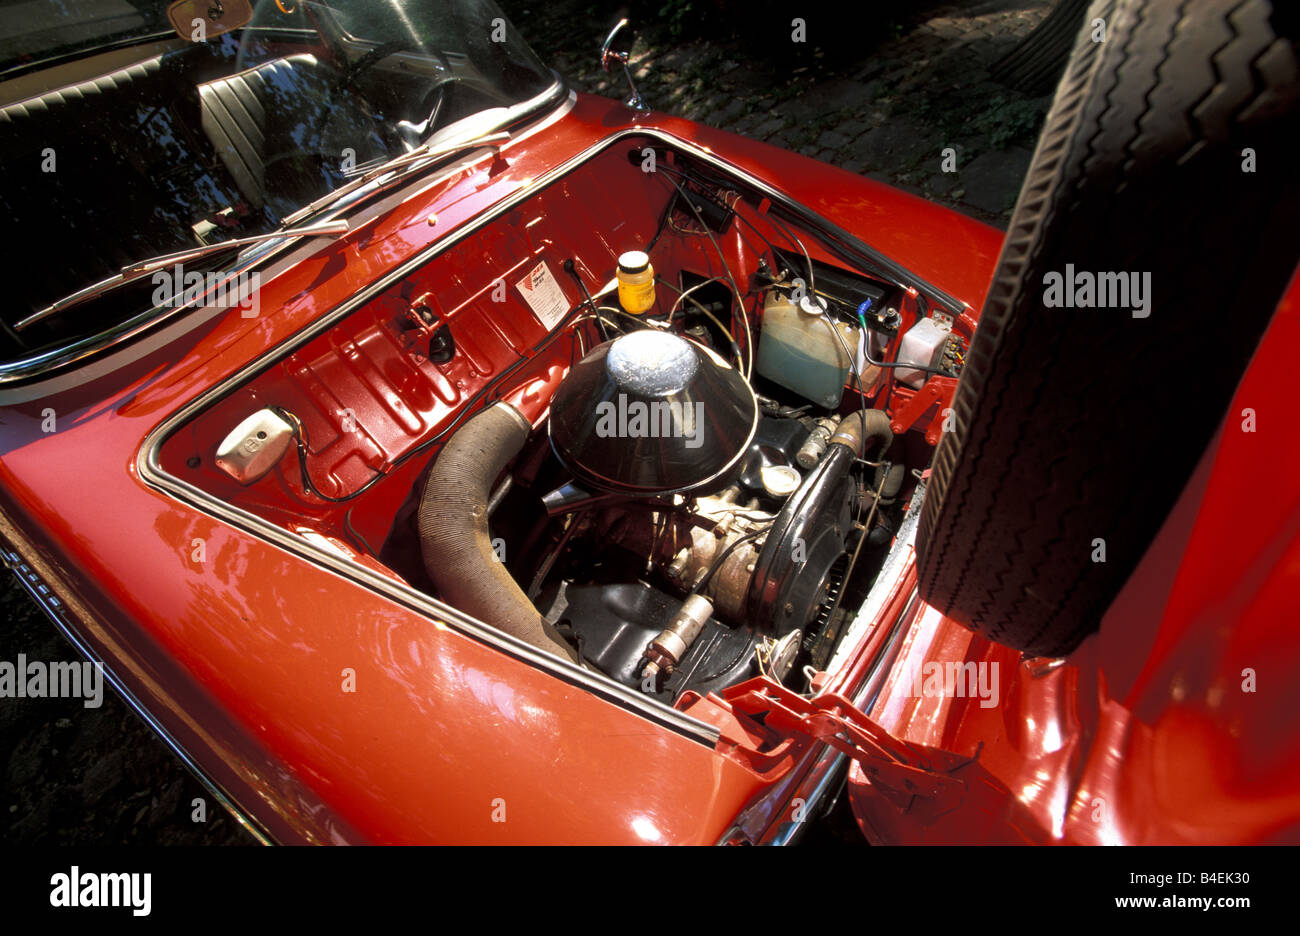 Glas Car High Resolution Stock Photography and Images - Alamy